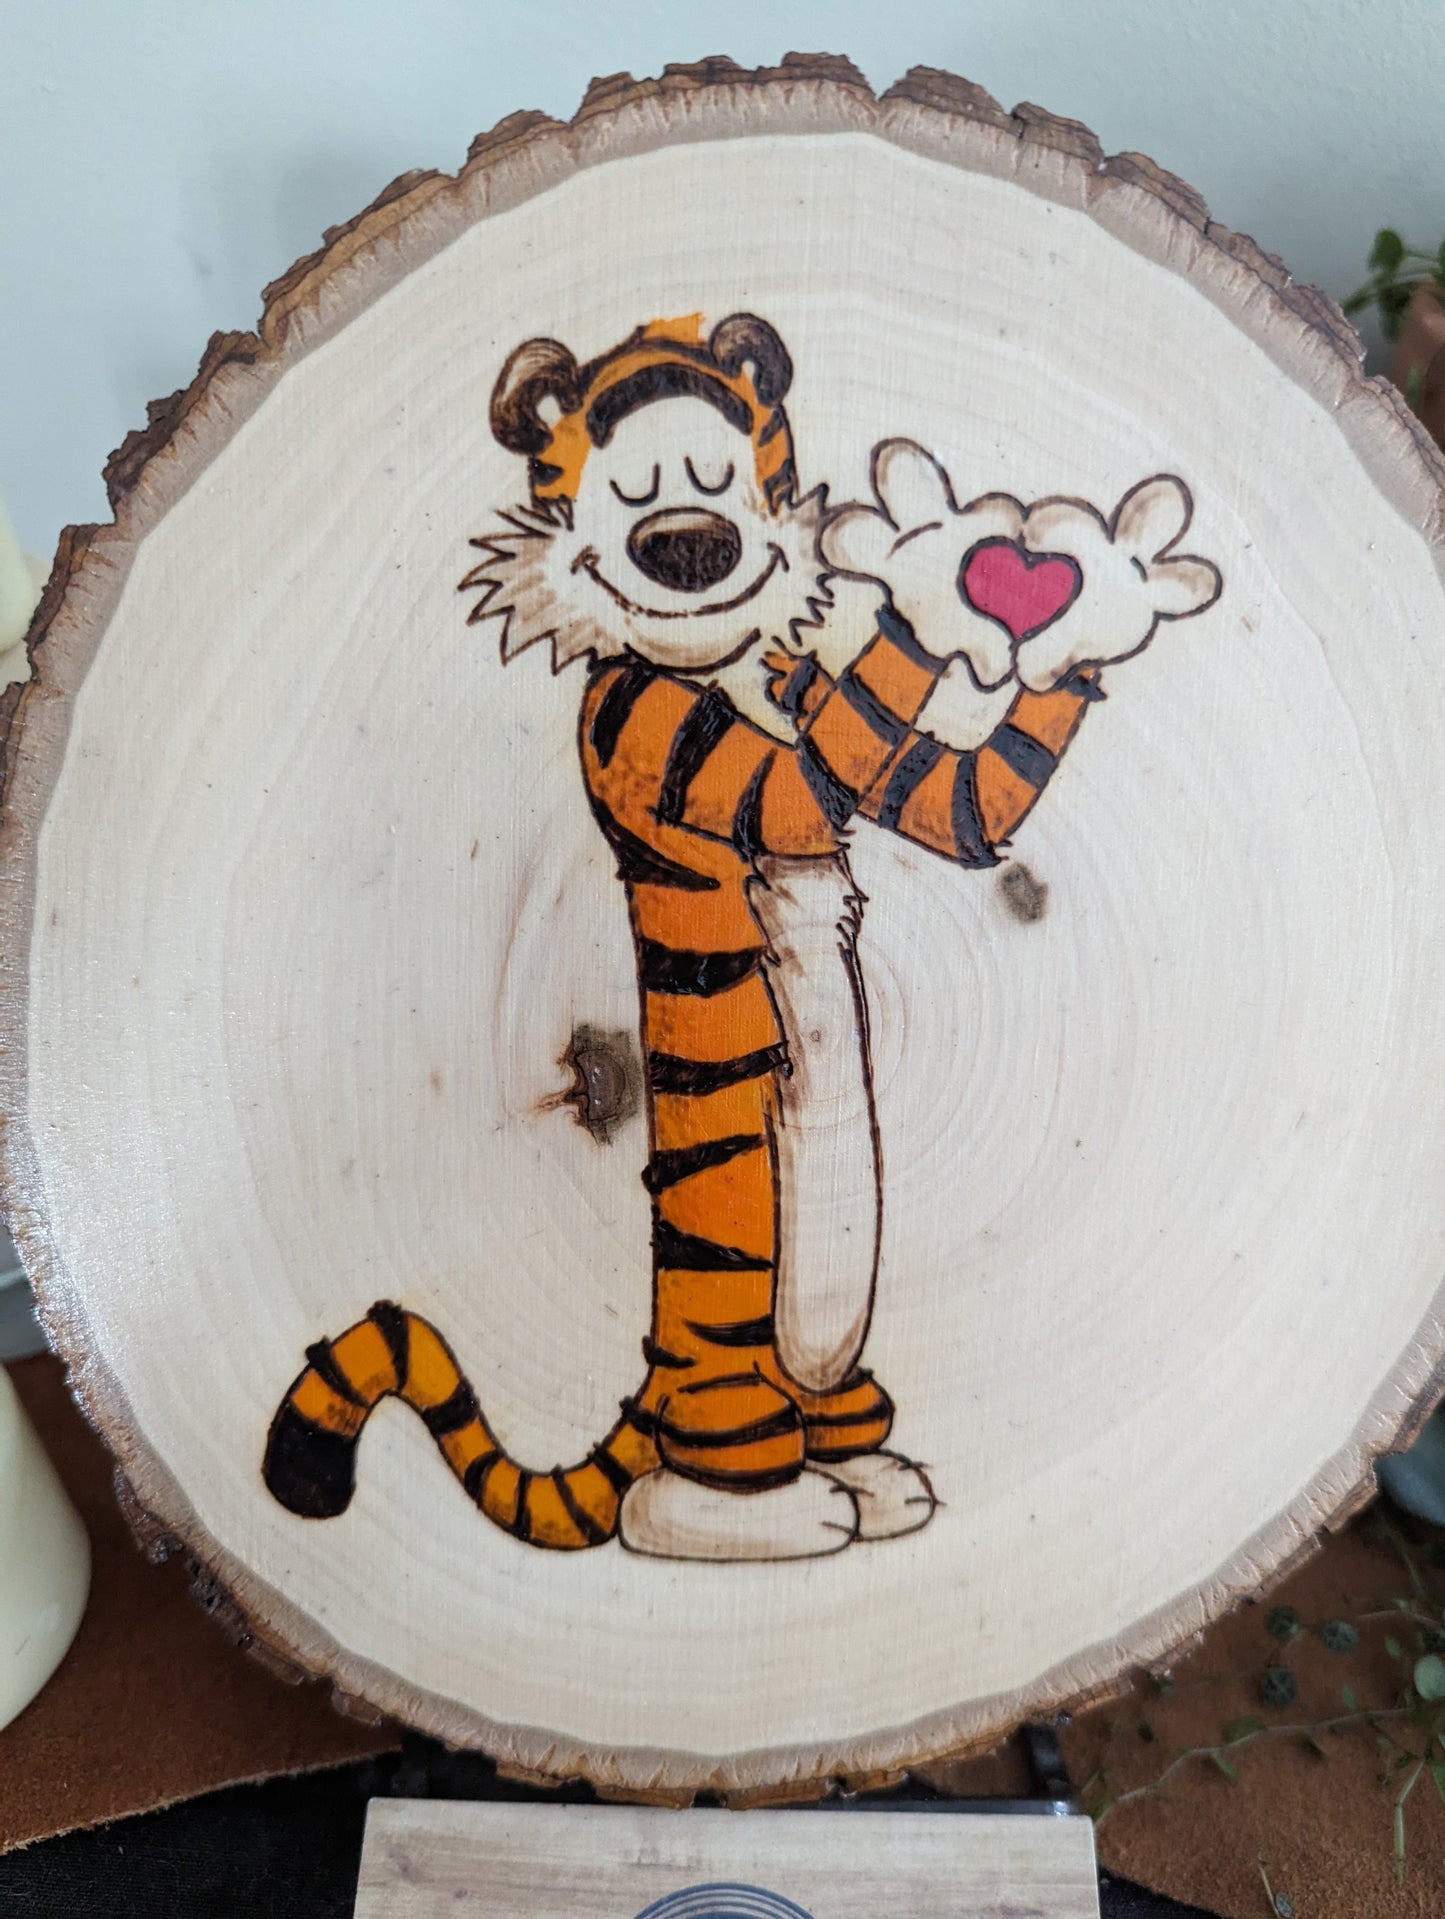 Calvin and Hobbes 'I Heart Hobbes' Pyrography on Wood Canvas